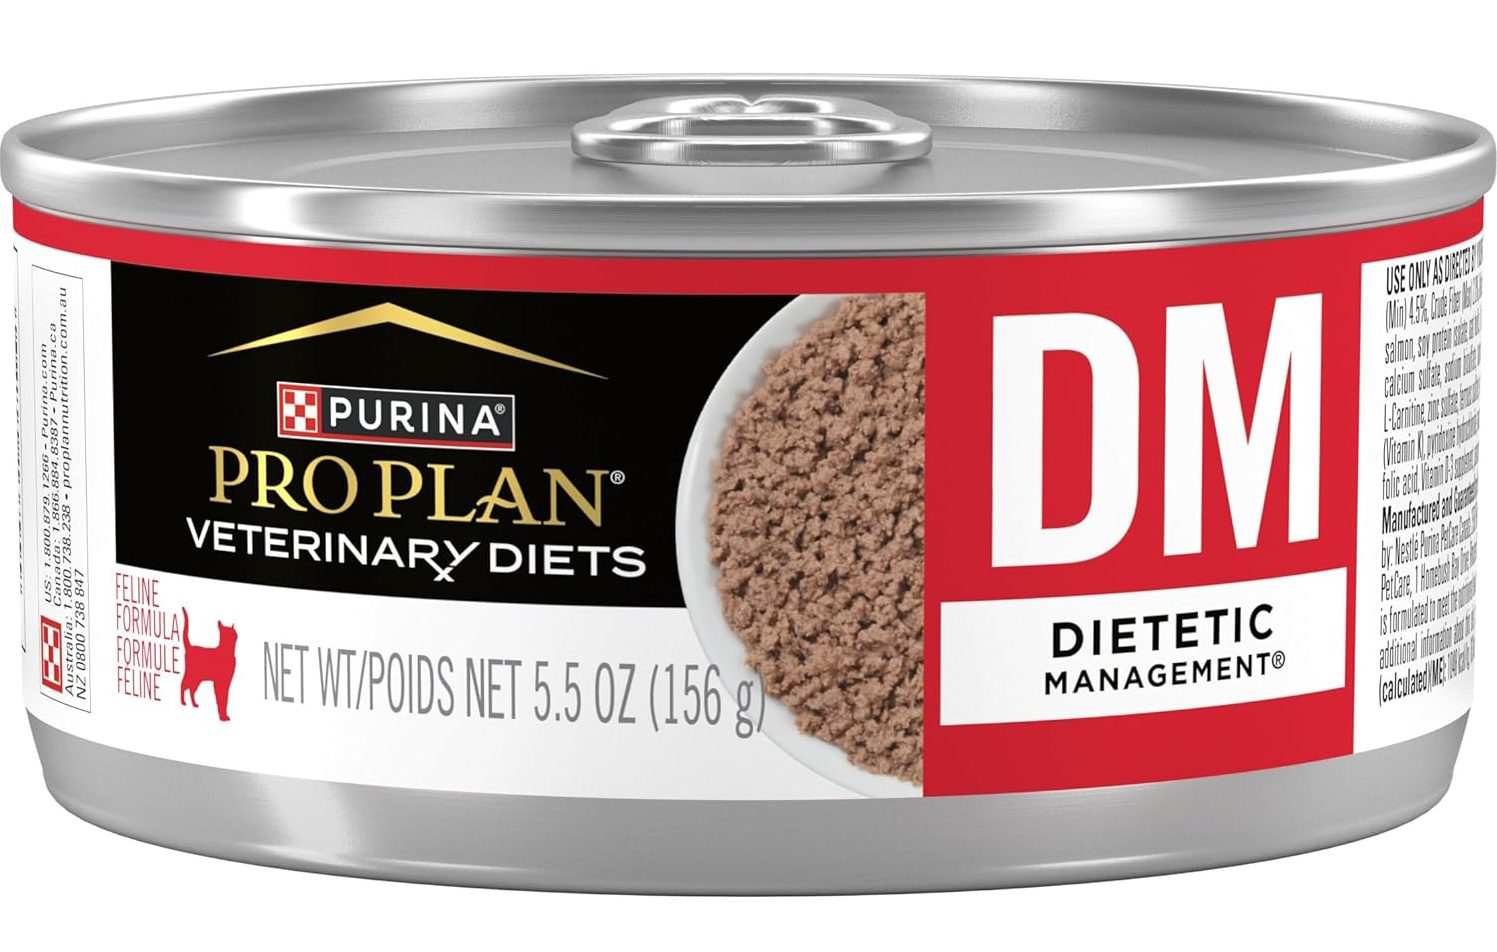 Purina Pro Plan Veterinary Diets DM Savory Selects Canned Cat Food